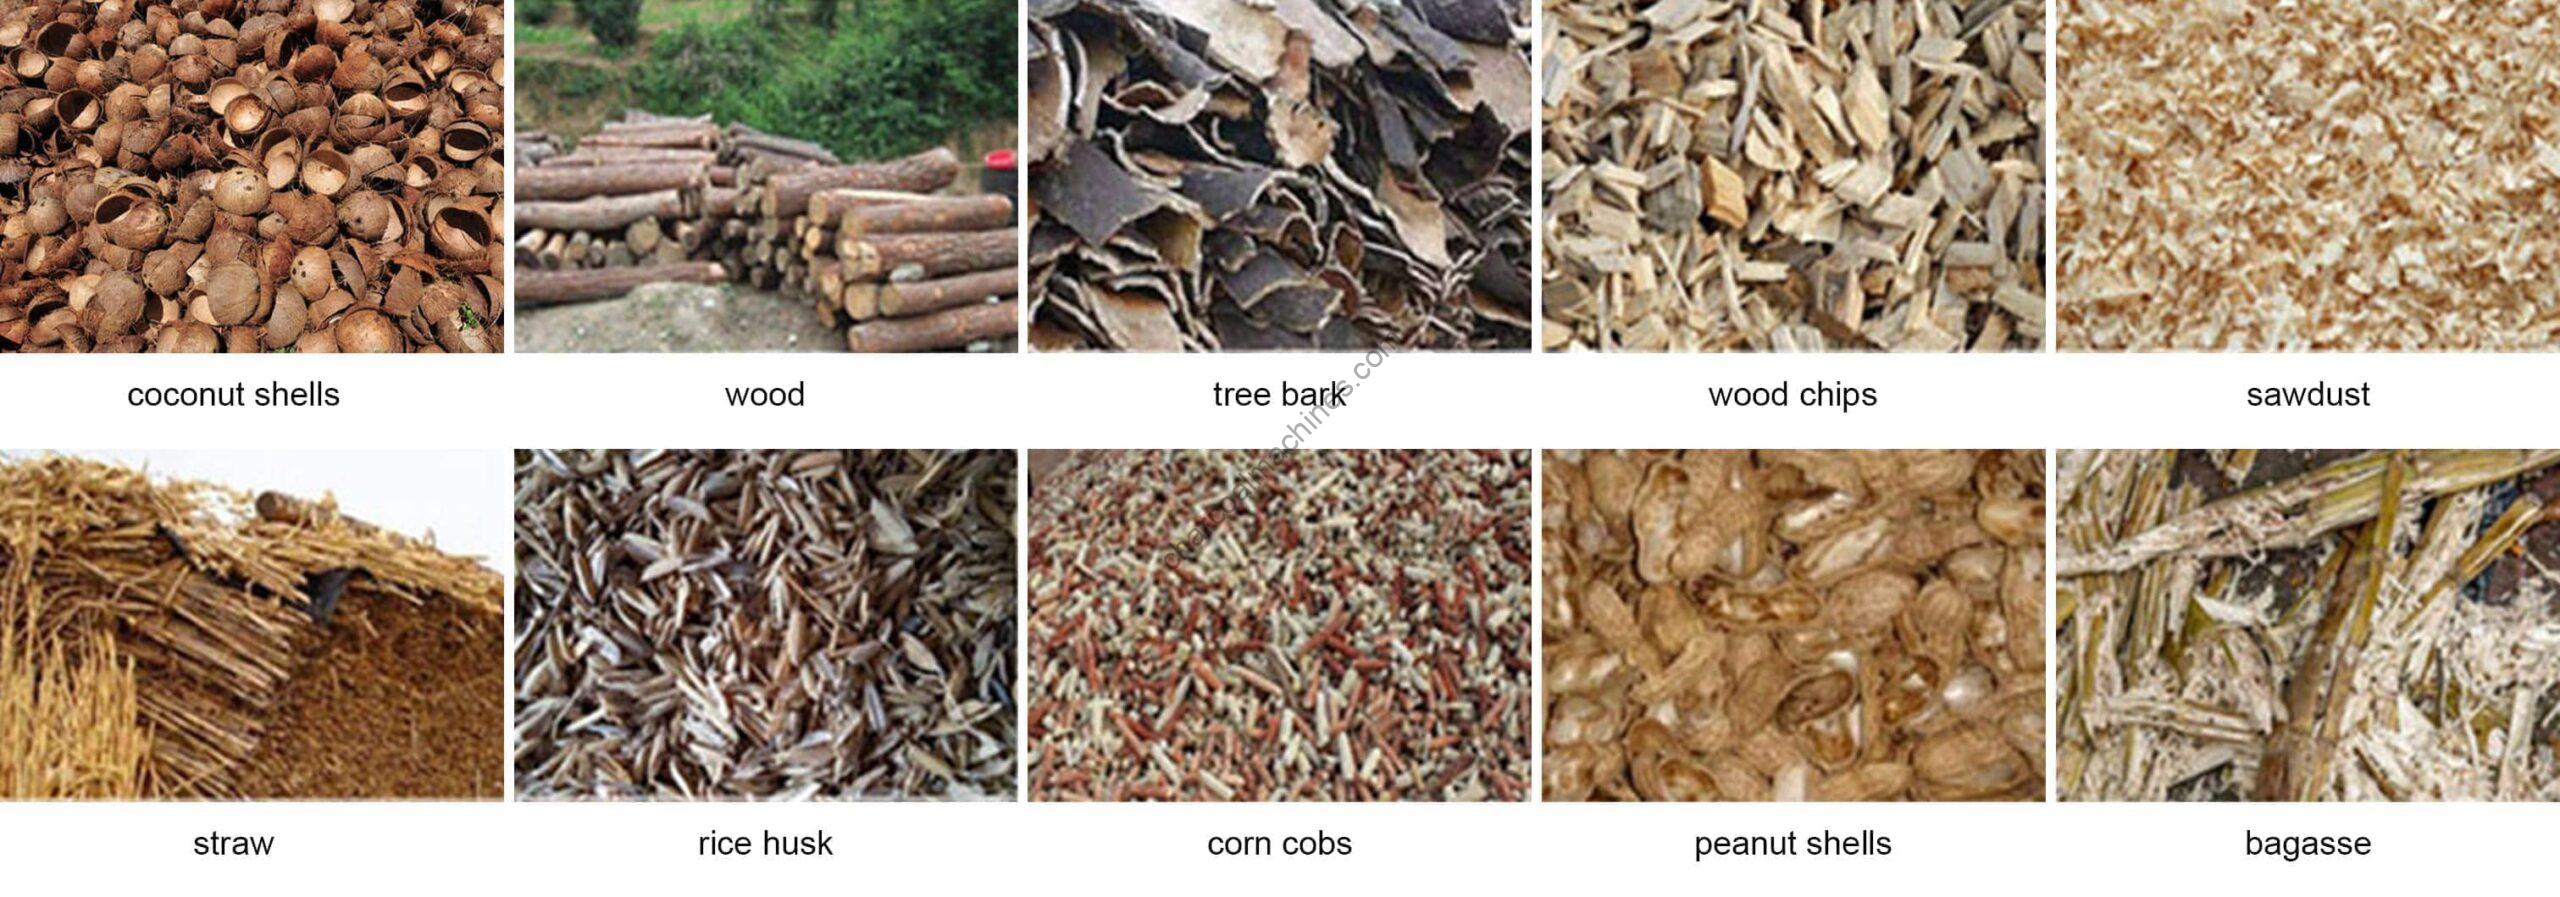 raw materials for making charcoal